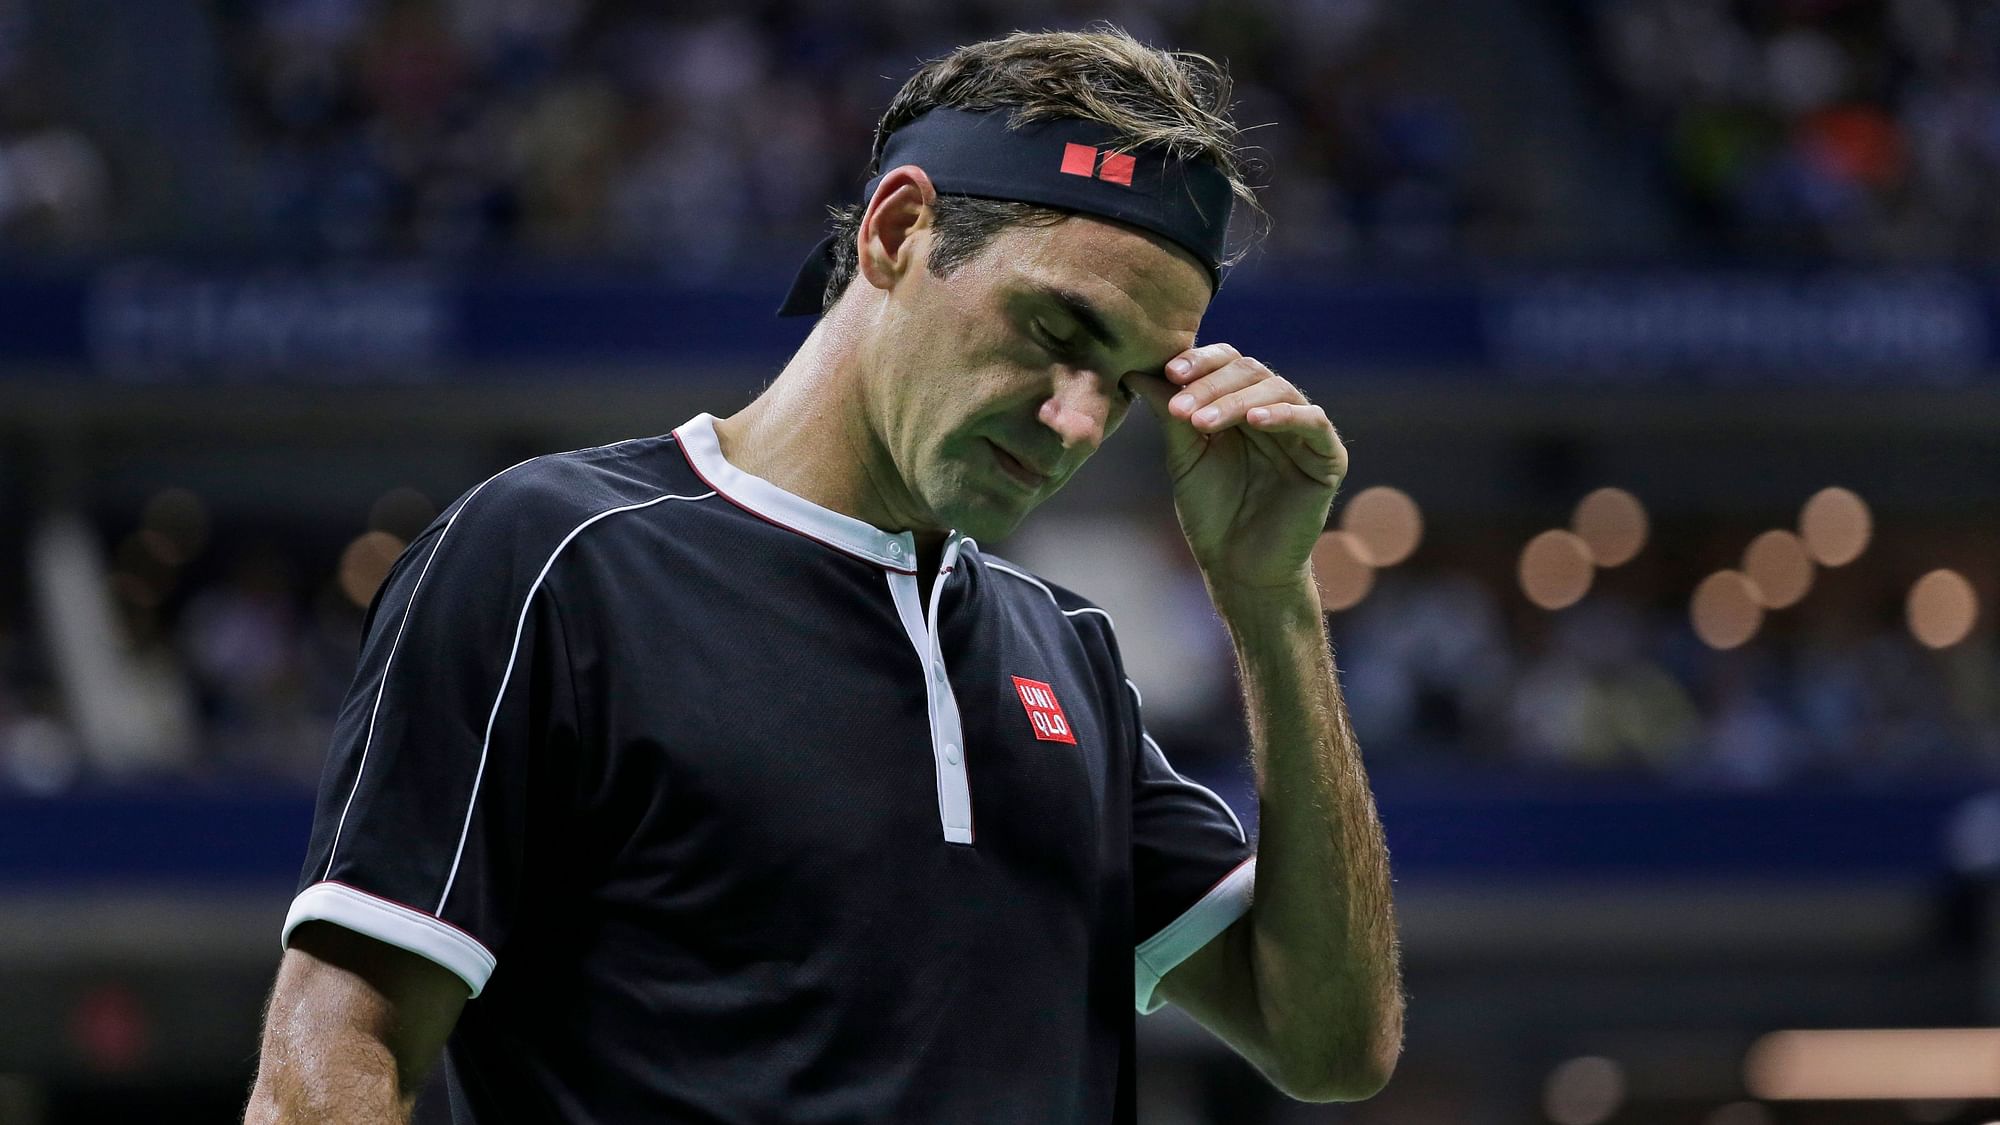 Roger Federer was beaten 3-6, 6-4, 3-6, 6-4, 6-2 by 78th-ranked Grigor Dimitrov in the US Open quarterfinals.